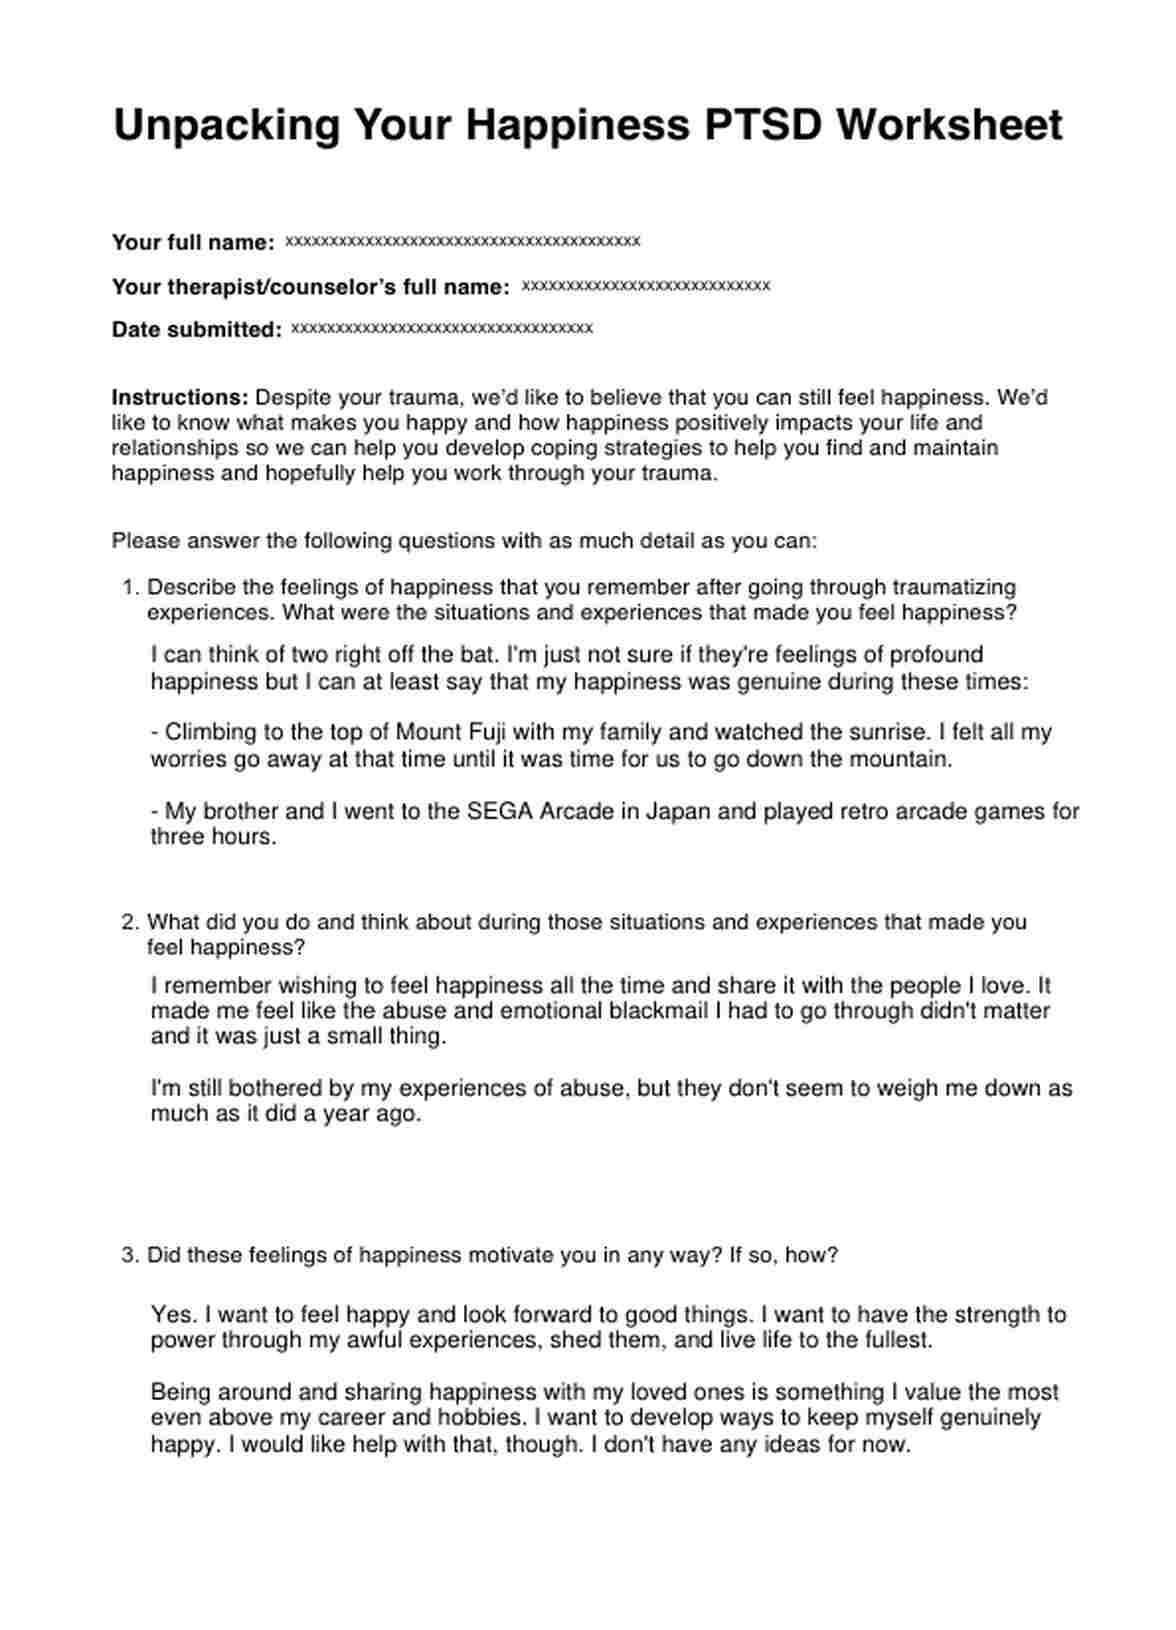 Unpacking Your Happiness PTSD Worksheet PDF Example